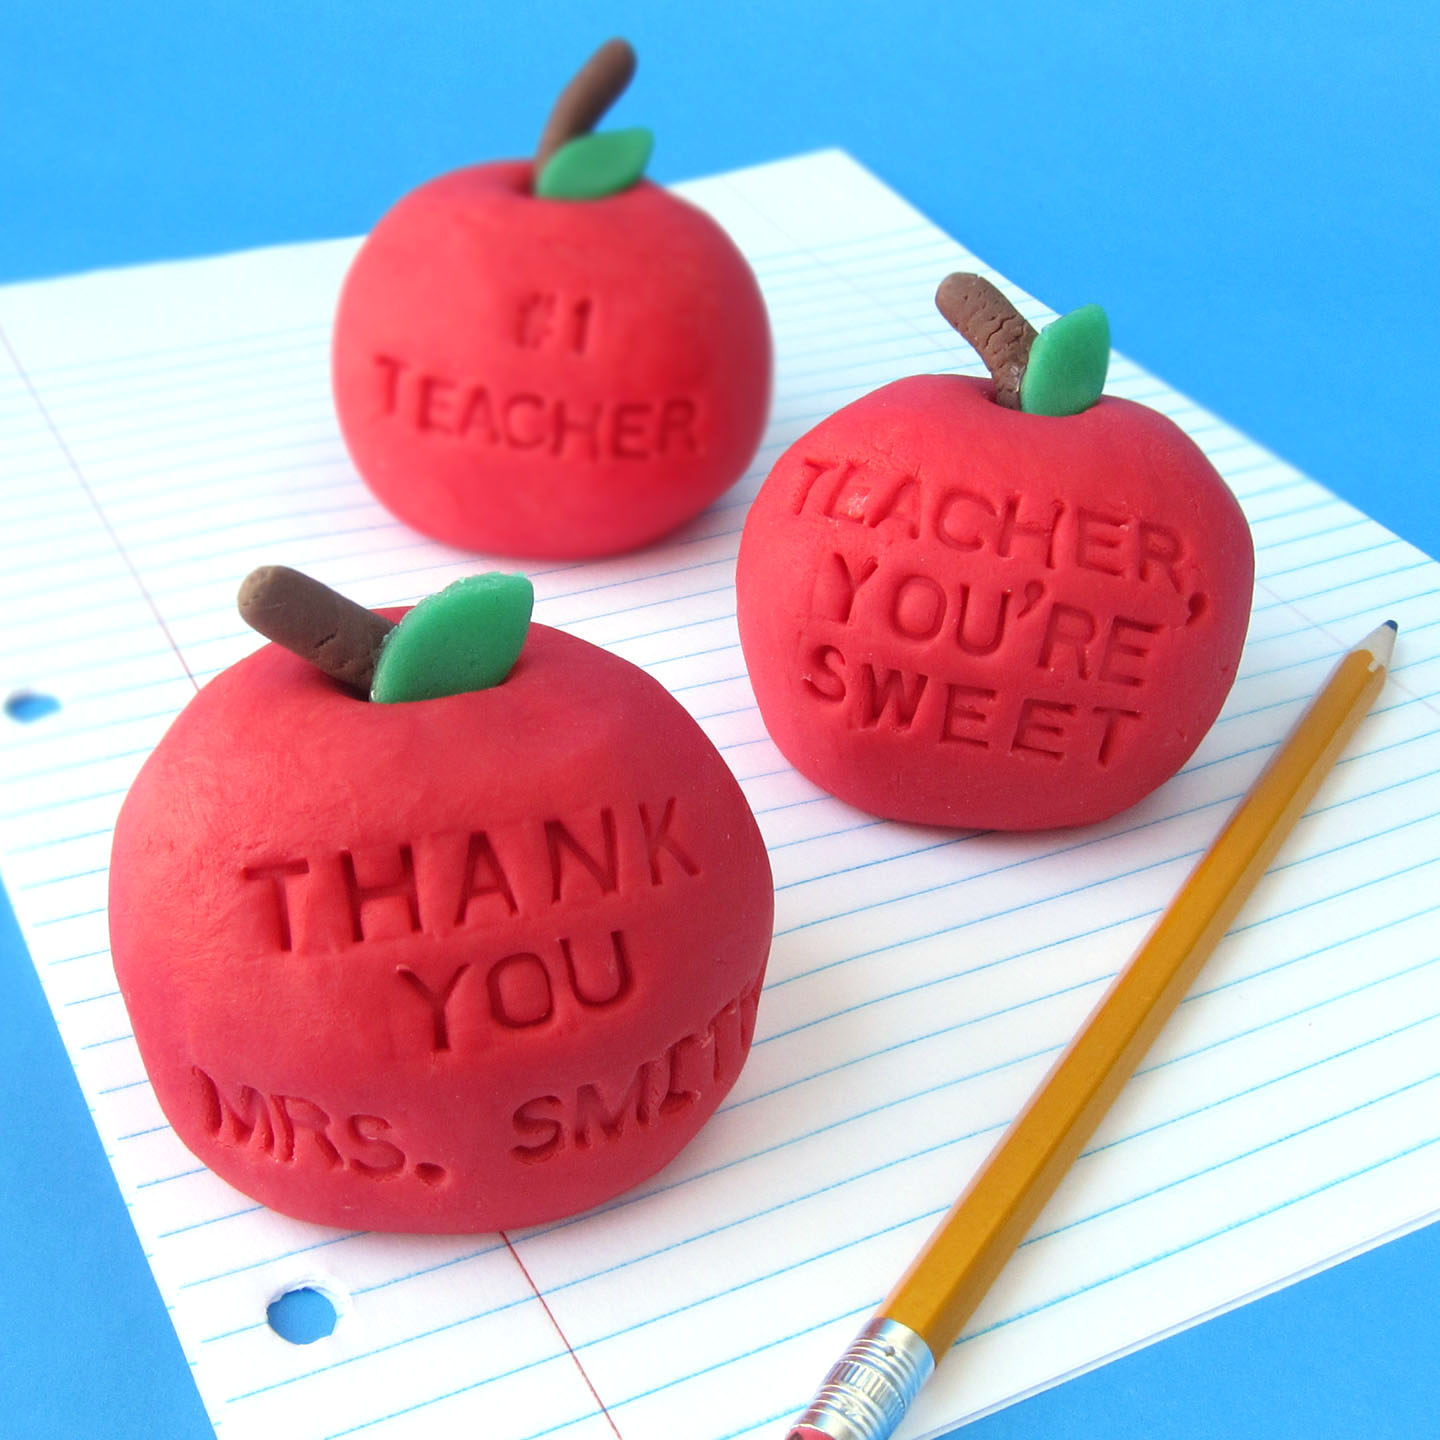 fudge apples - white chocolate fudge shaped into apples and personalized with messages to teachers